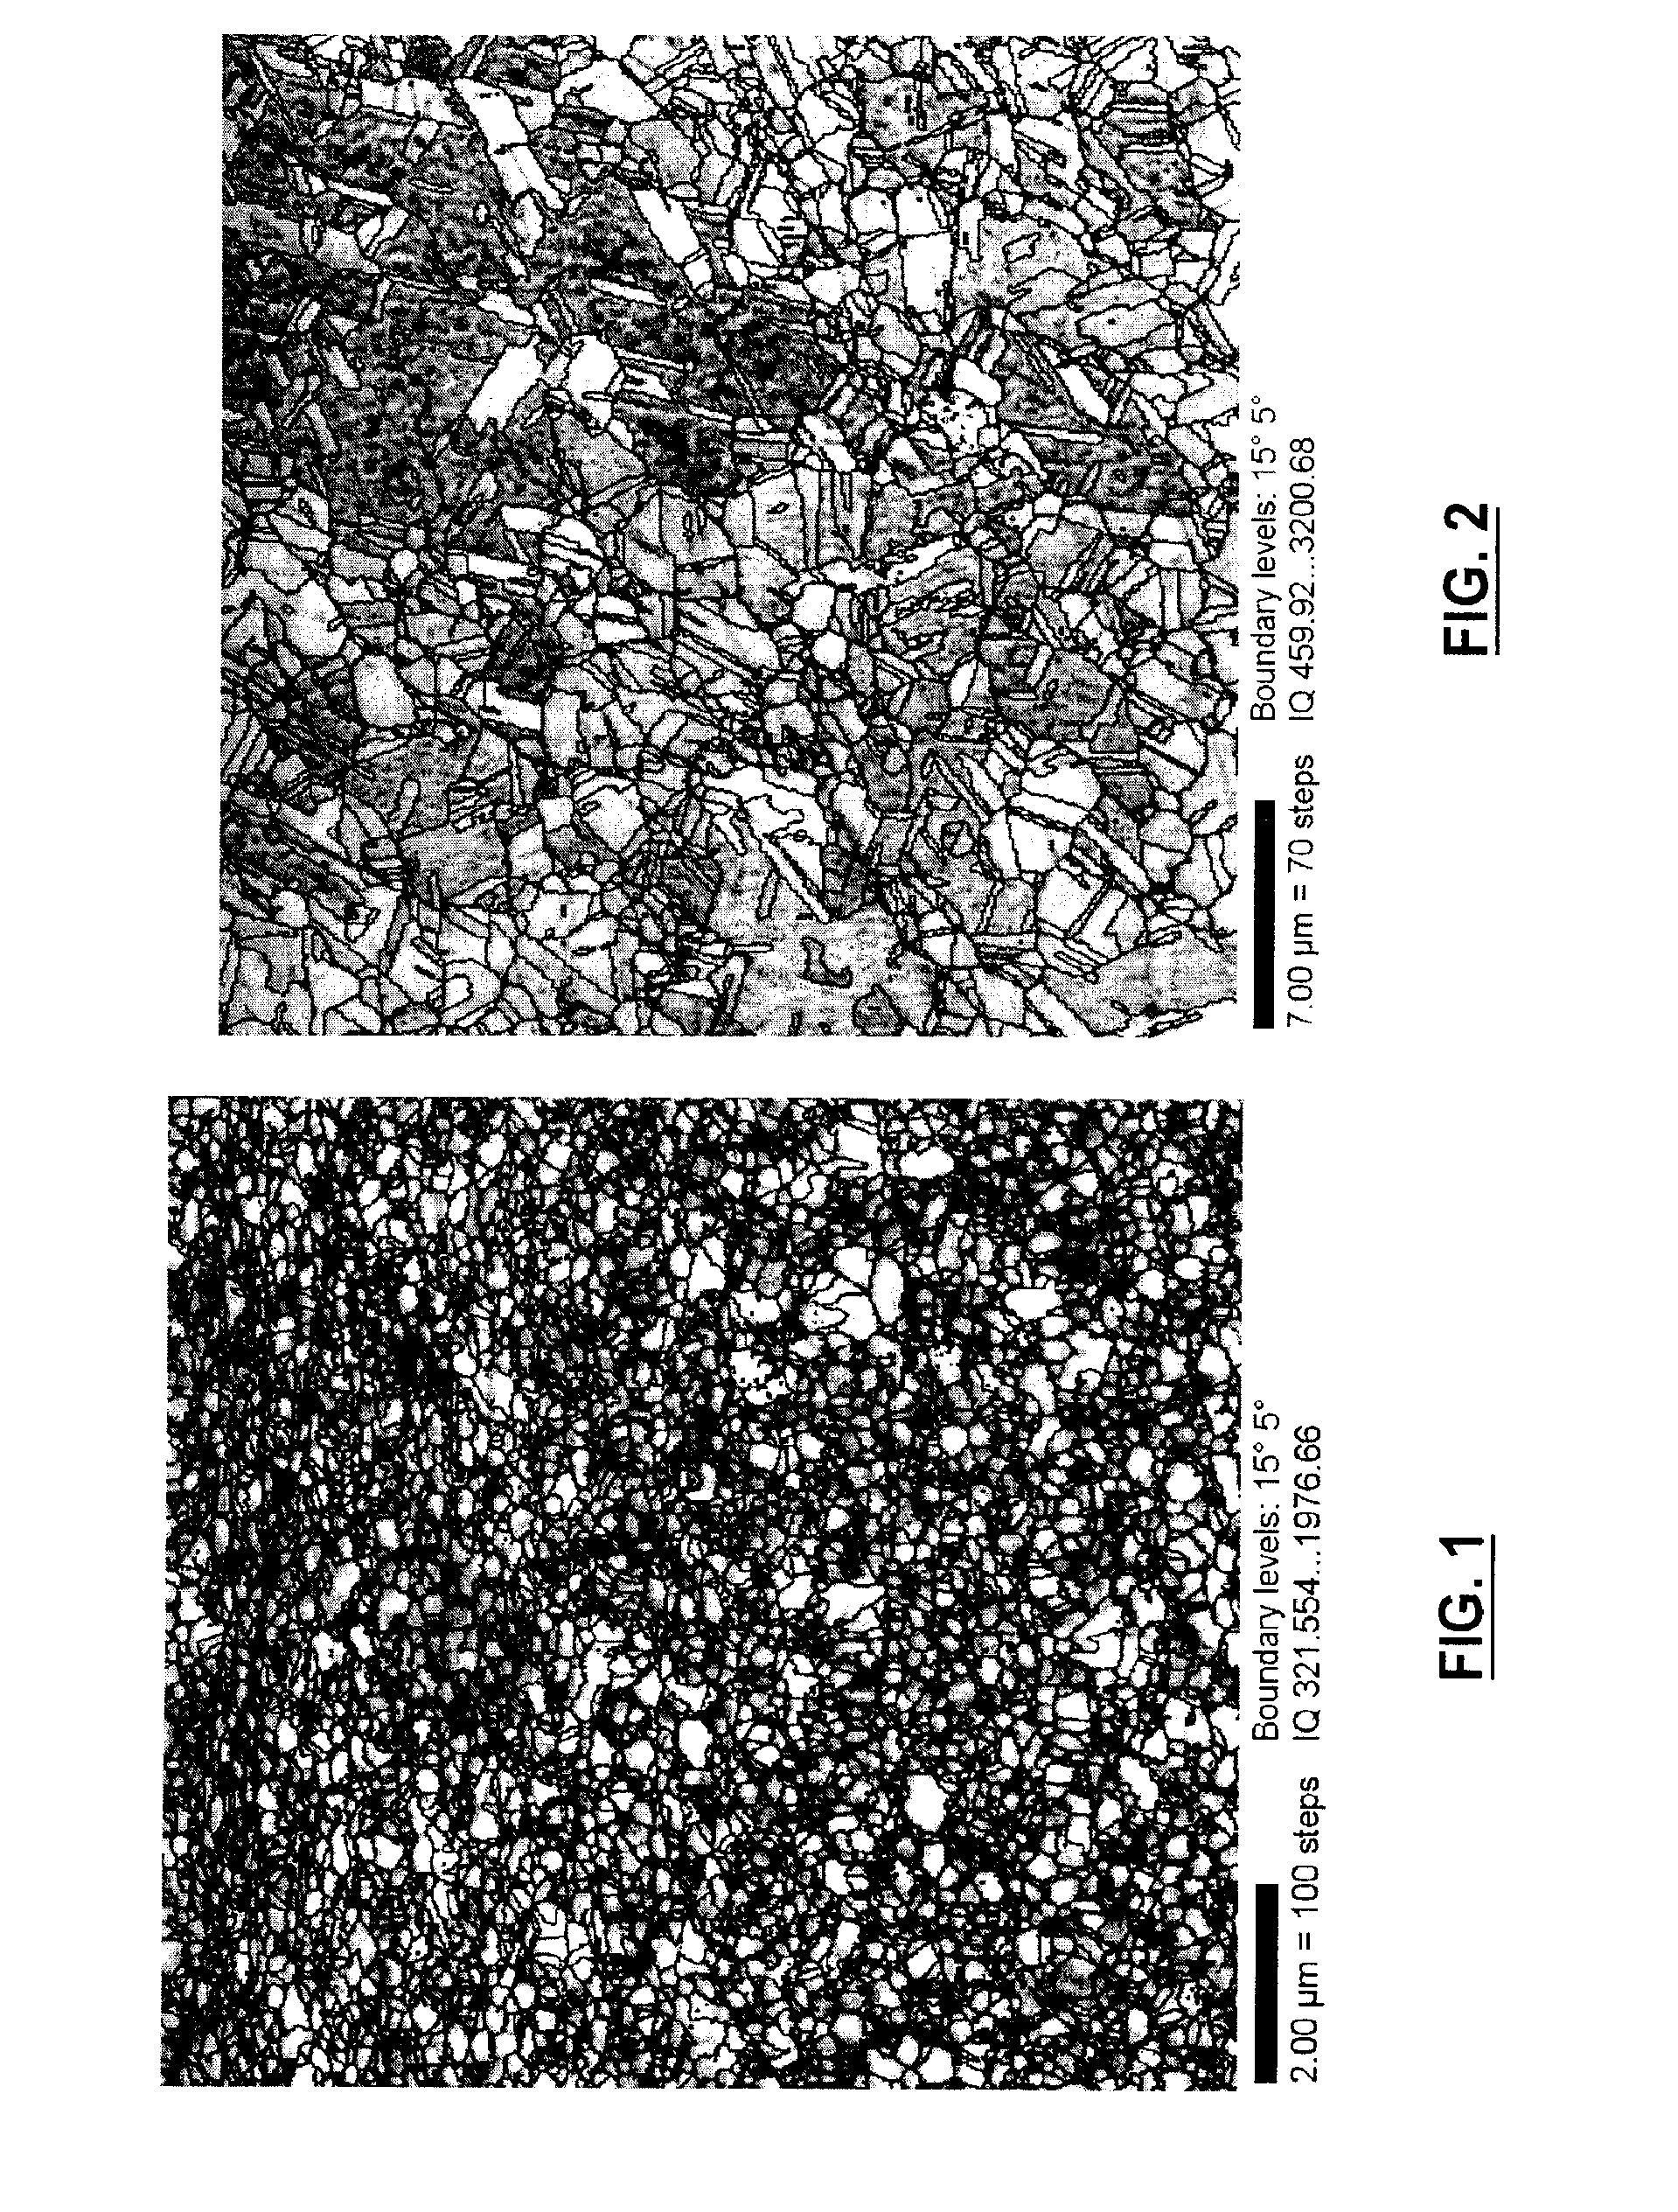 Electrodeposition method for preparing polycrystalline copper having improved mechanical and physical properties